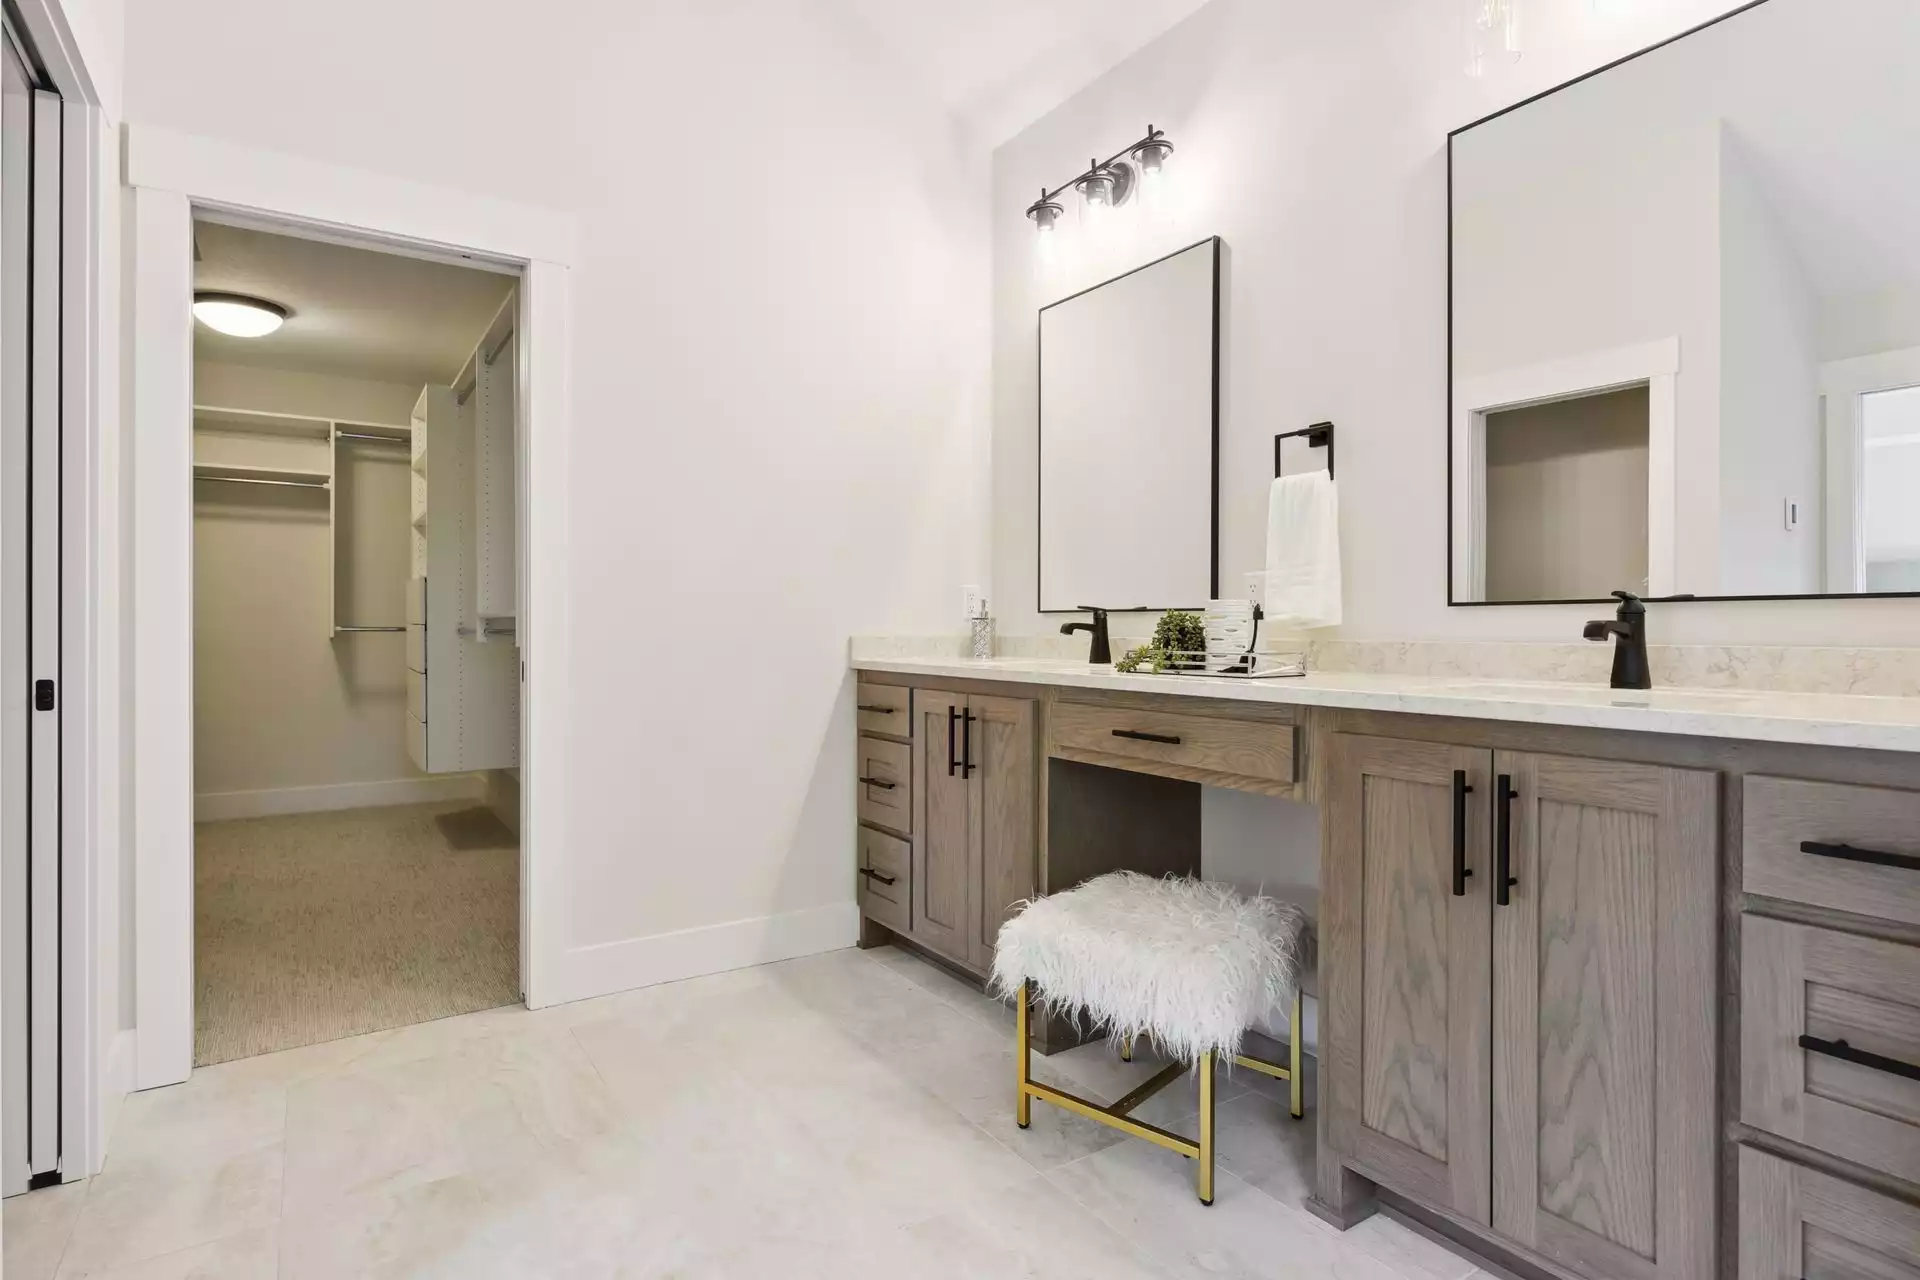 Owner’s suite bathroom features double vanity with make-up station